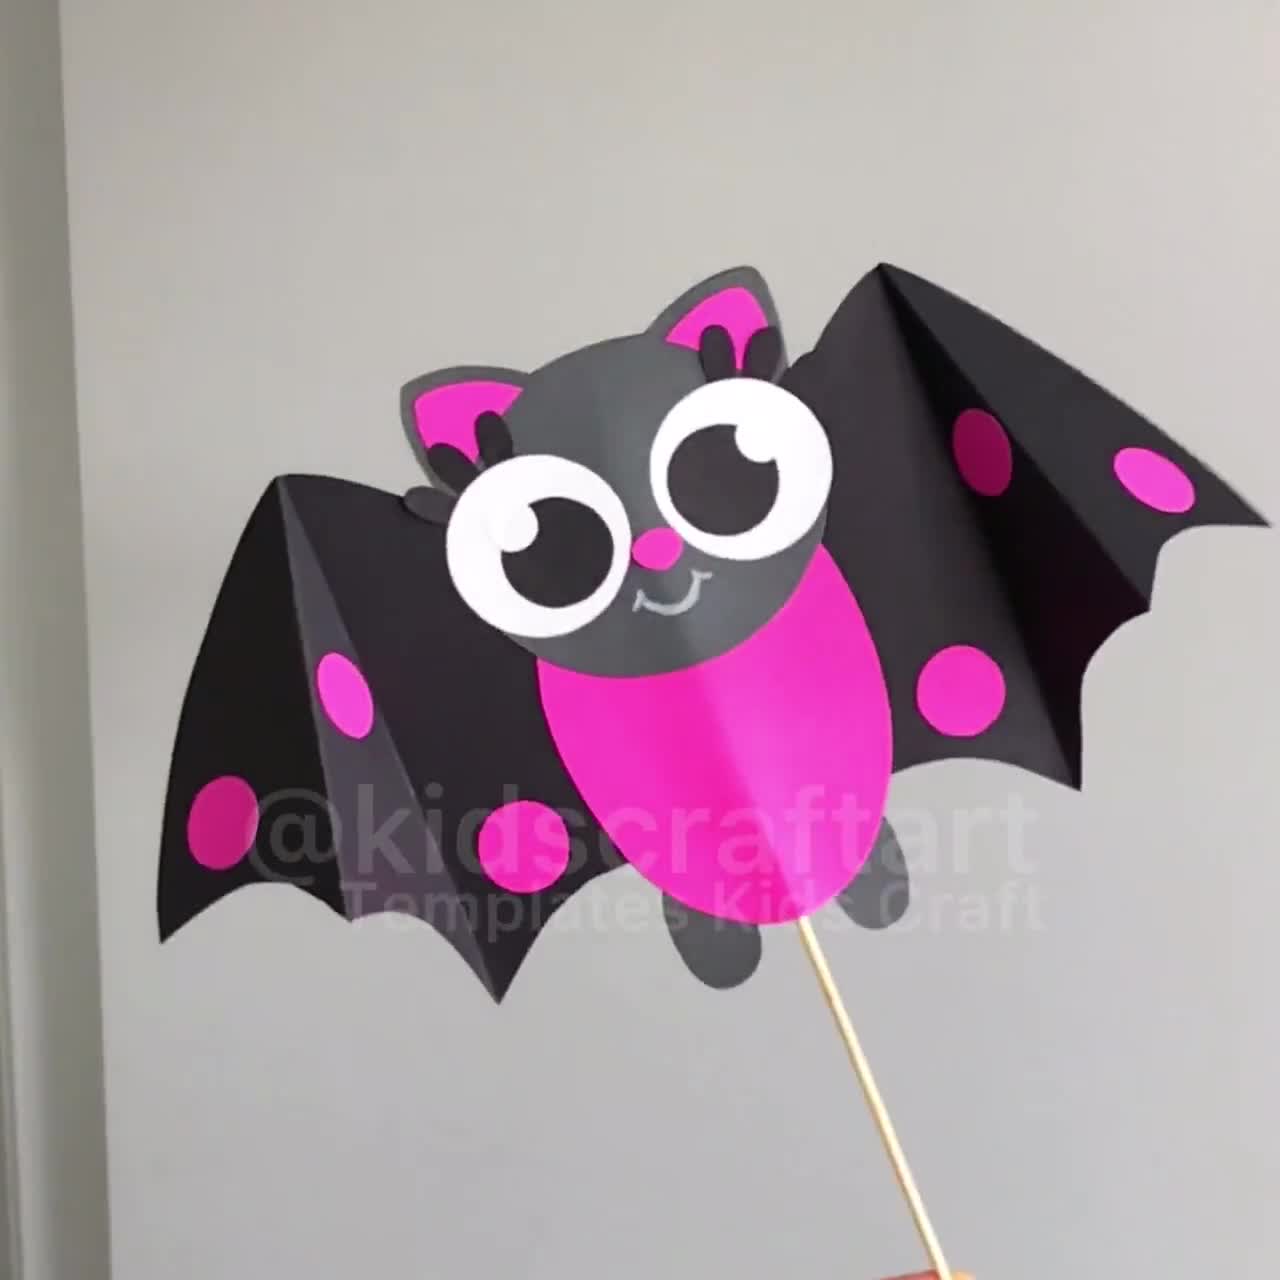 Printable Bat, Create a Bat Cut and Paste Craft With Coloring Sheet. -   Israel